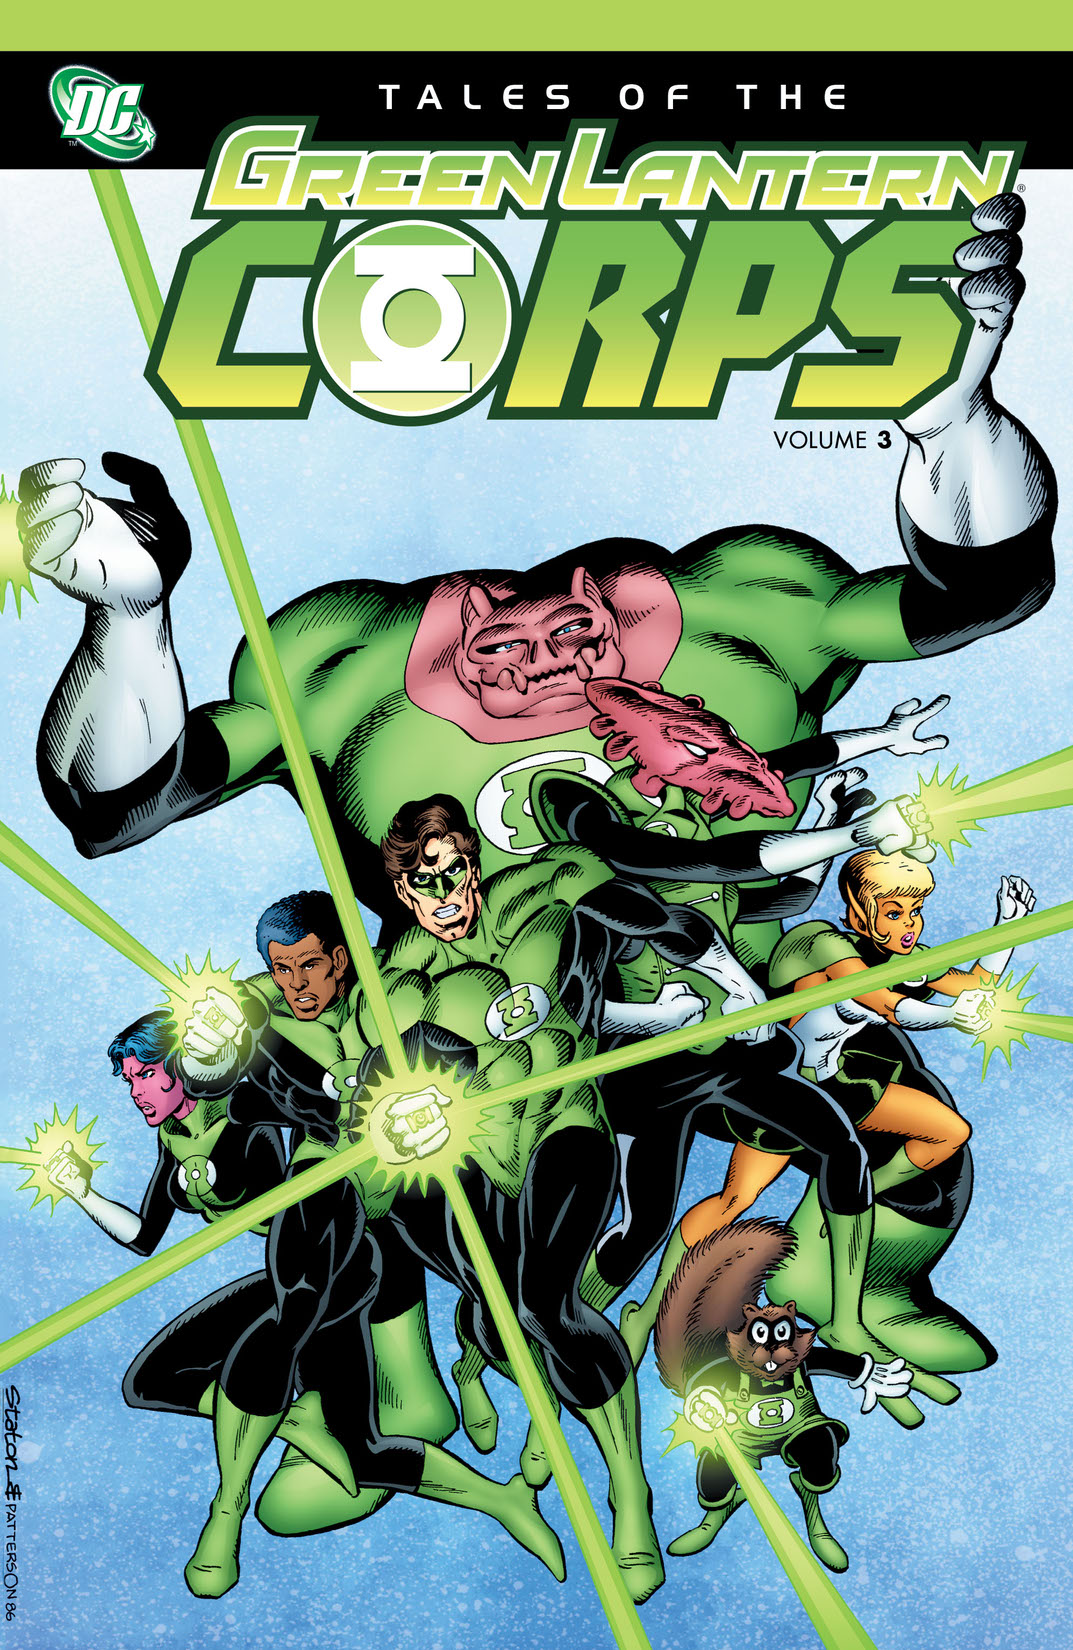 Tales of the Green Lantern Corps Vol. 3 preview images